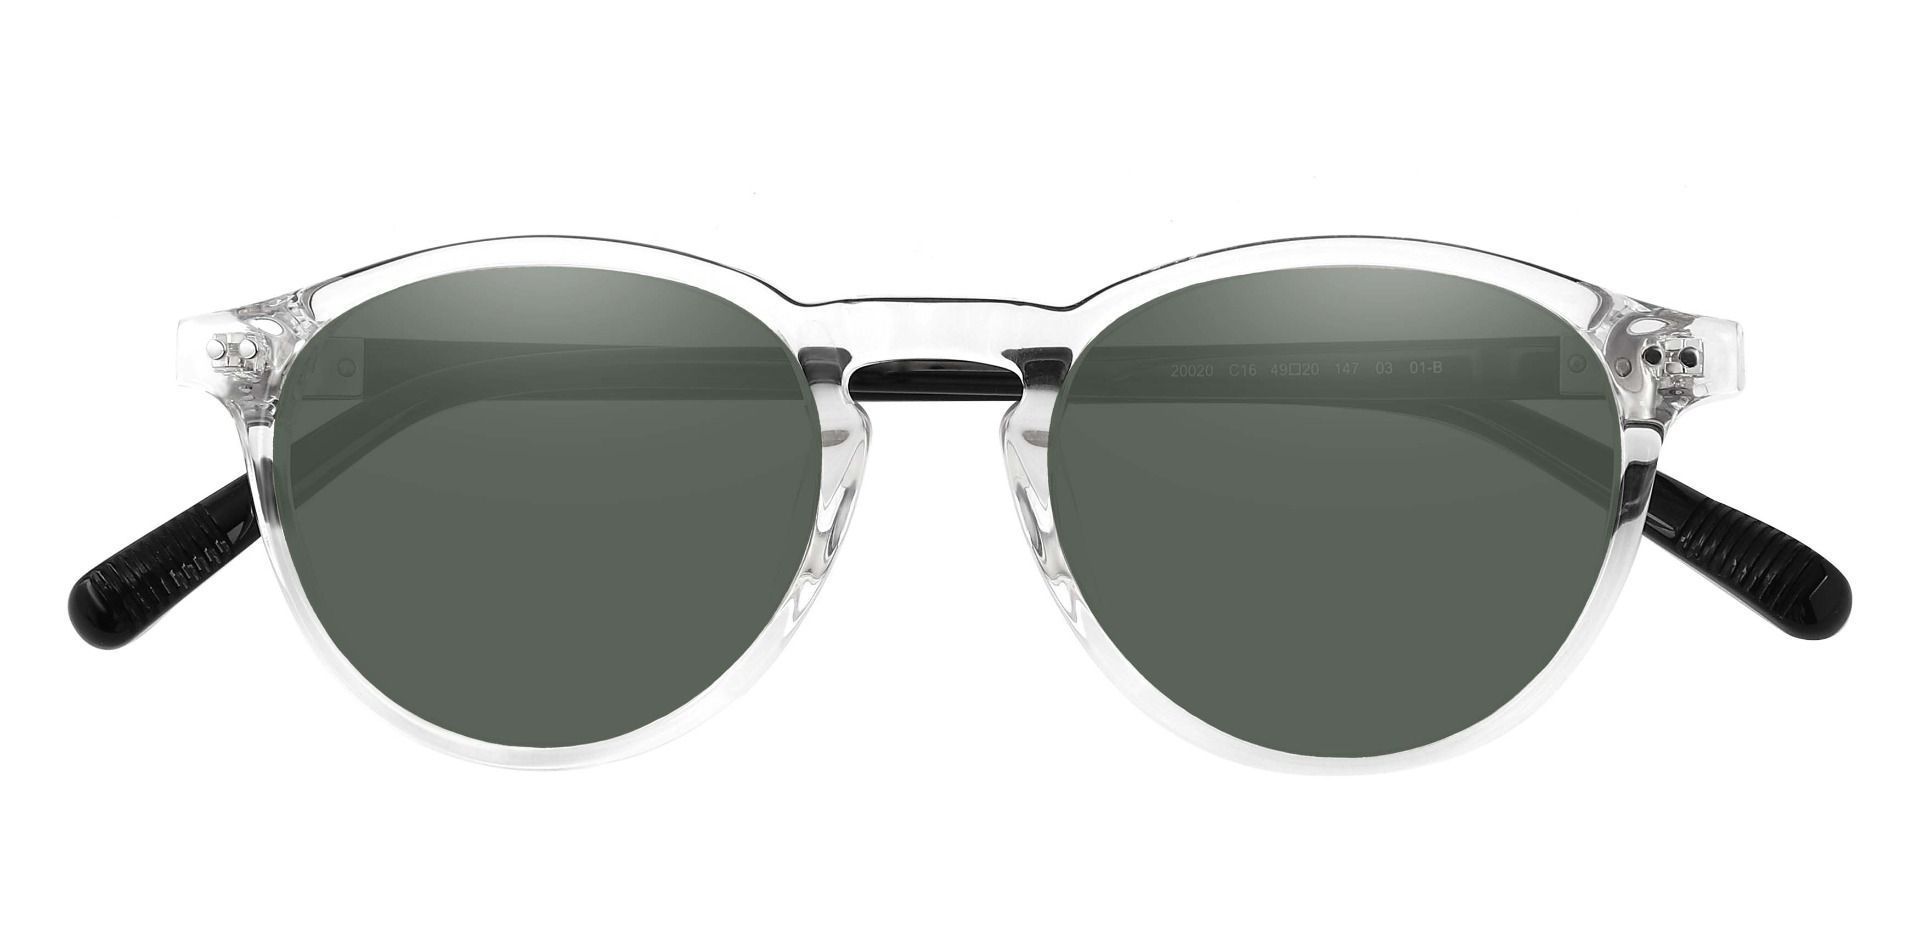 Monarch Oval Non-Rx Sunglasses - Clear Frame With Green Lenses